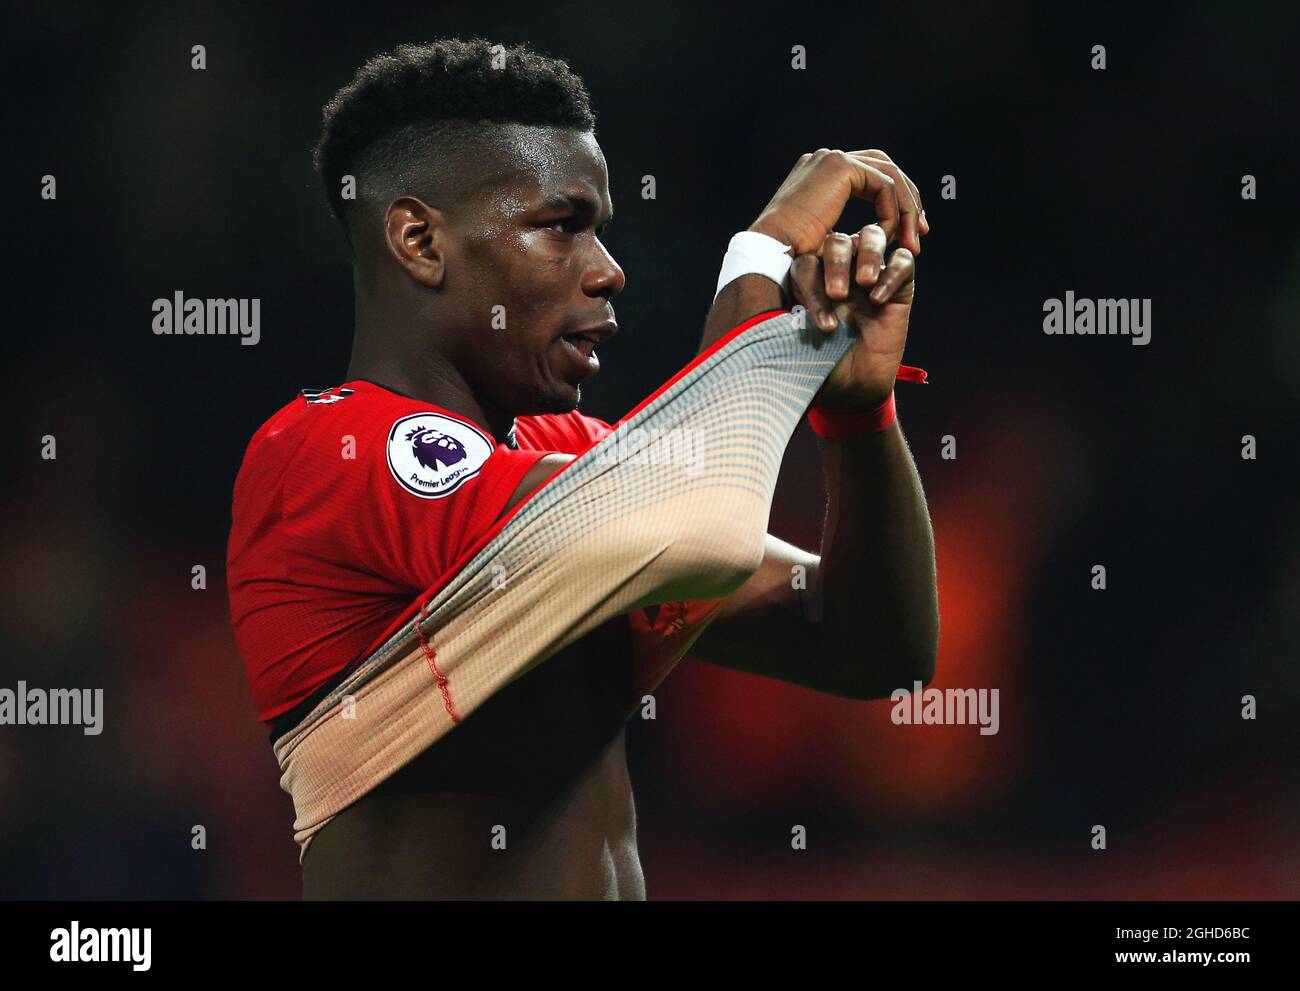 gerningsmanden Mandag relæ Manchester United's Paul Pogba takes off his shirt at full time during the Premier  League match at Old Trafford, Manchester. Picture date: 26th December 2018.  Picture credit should read: Matt McNulty/Sportimage via